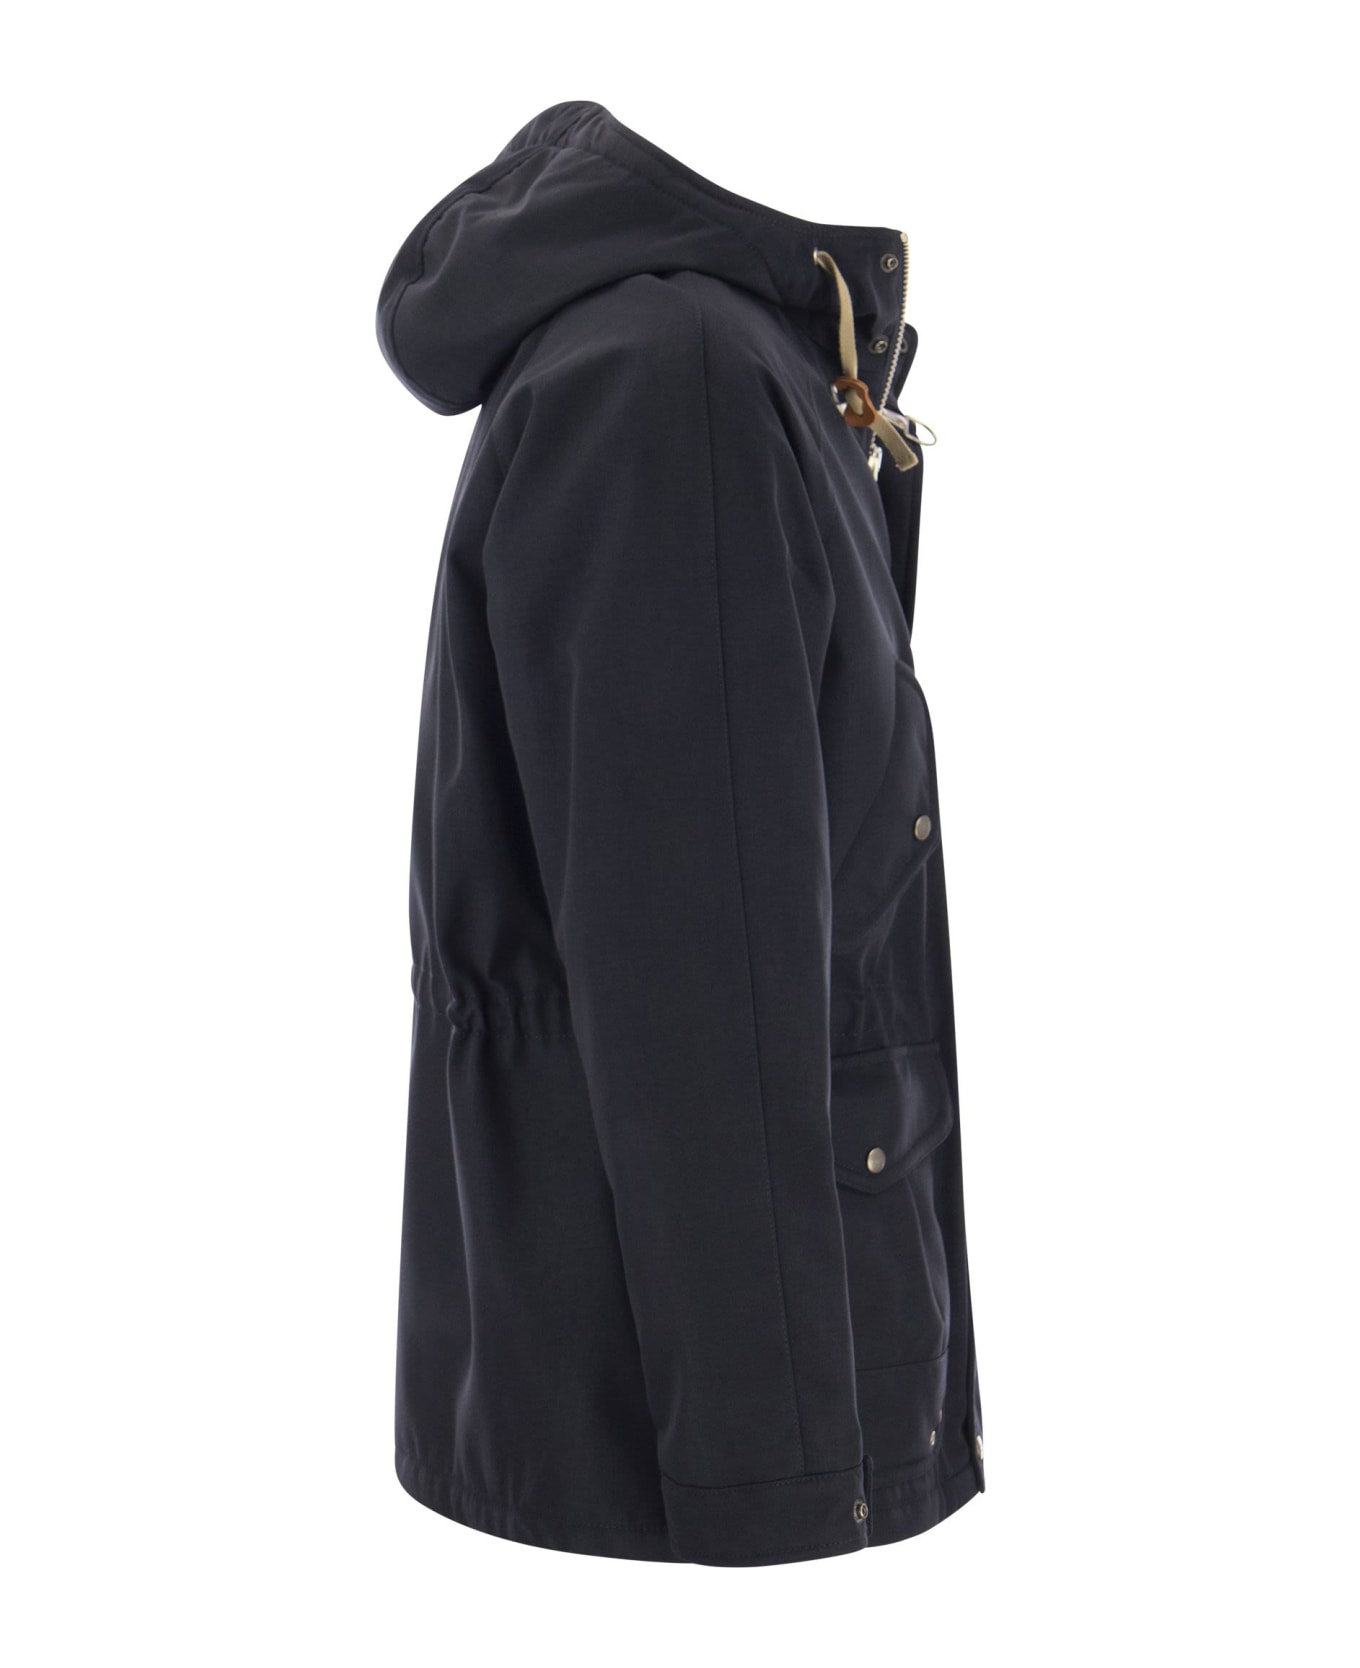 Fay Archive Hooded Parka - Blue